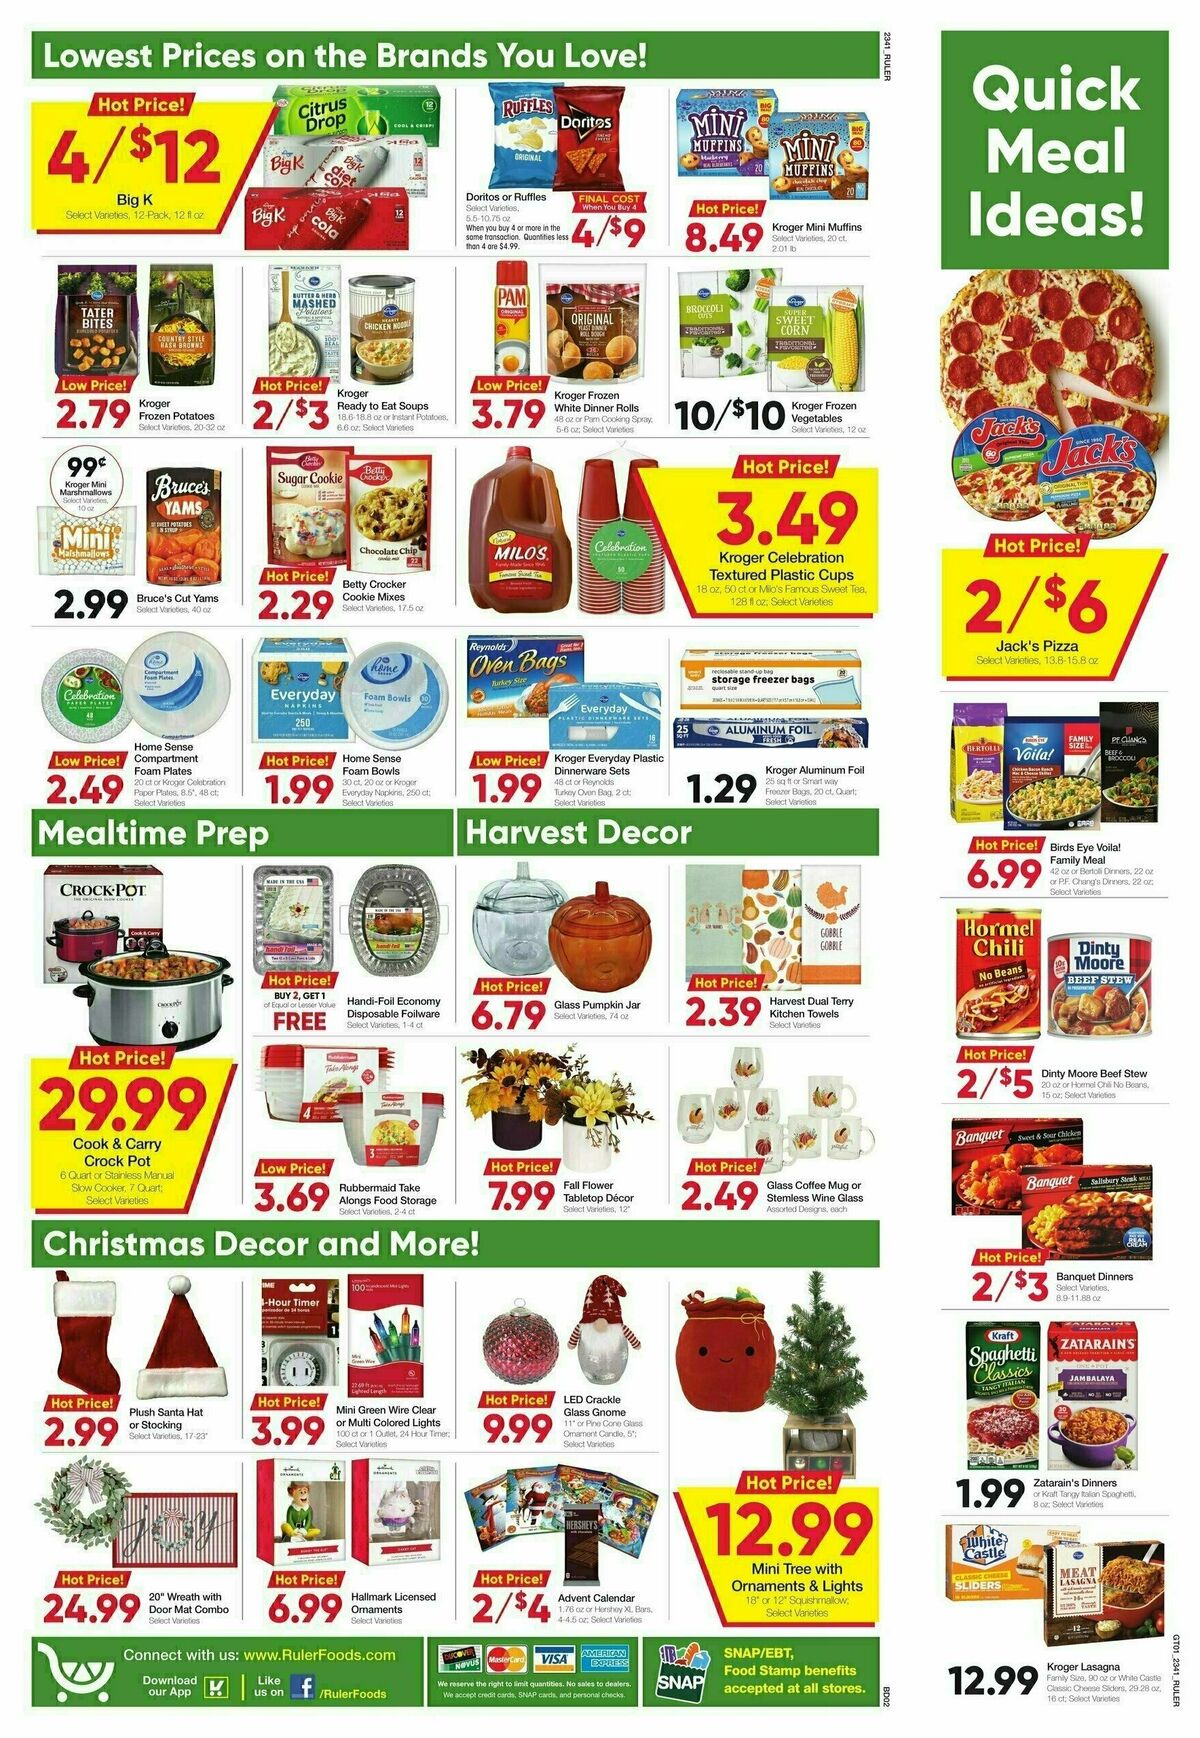 Ruler Foods Weekly Ad from November 8